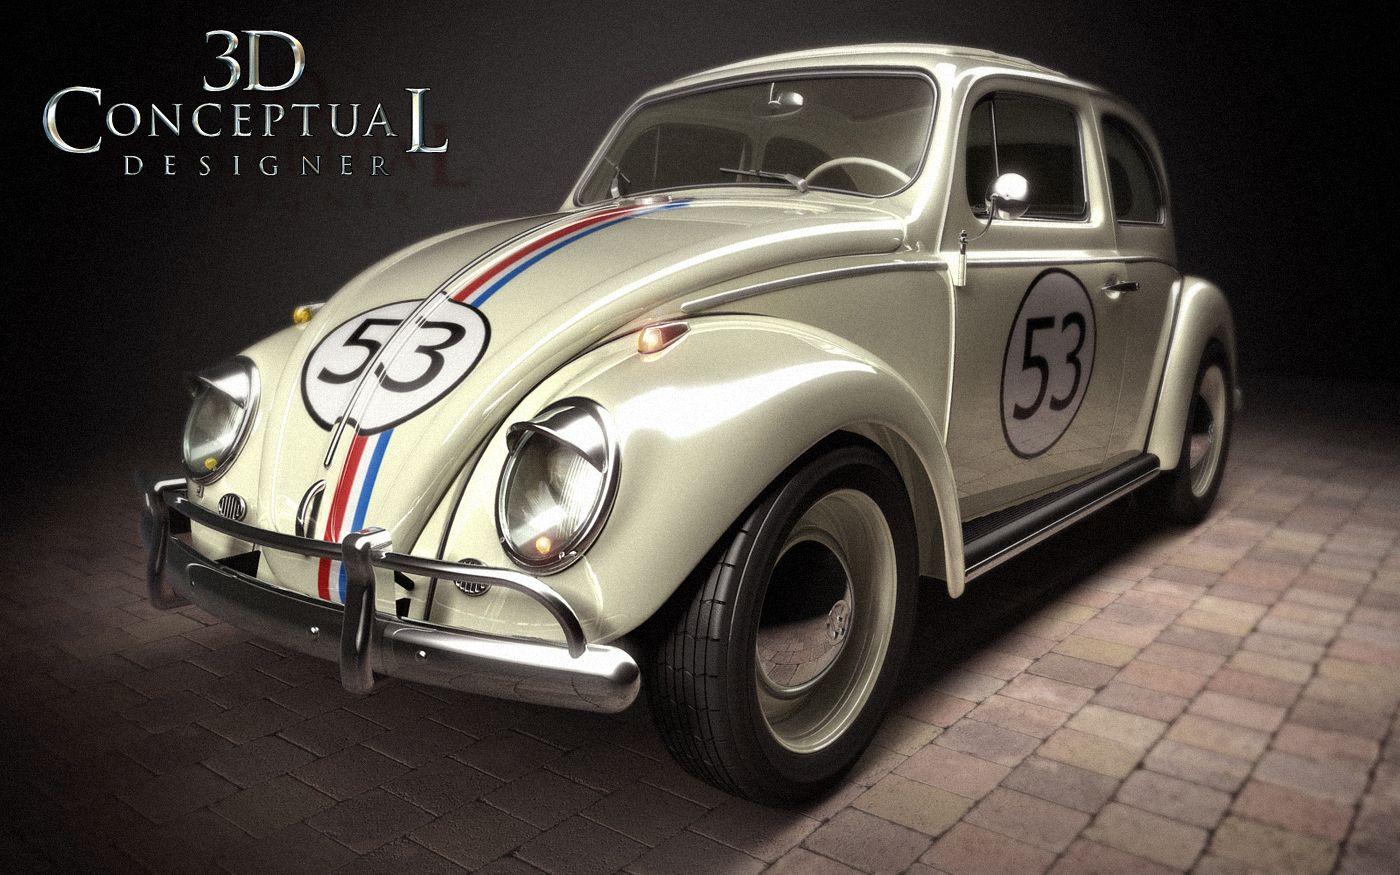 3DconceptualdesignerBlog: Project Review: Herbie Fully Loaded PART V